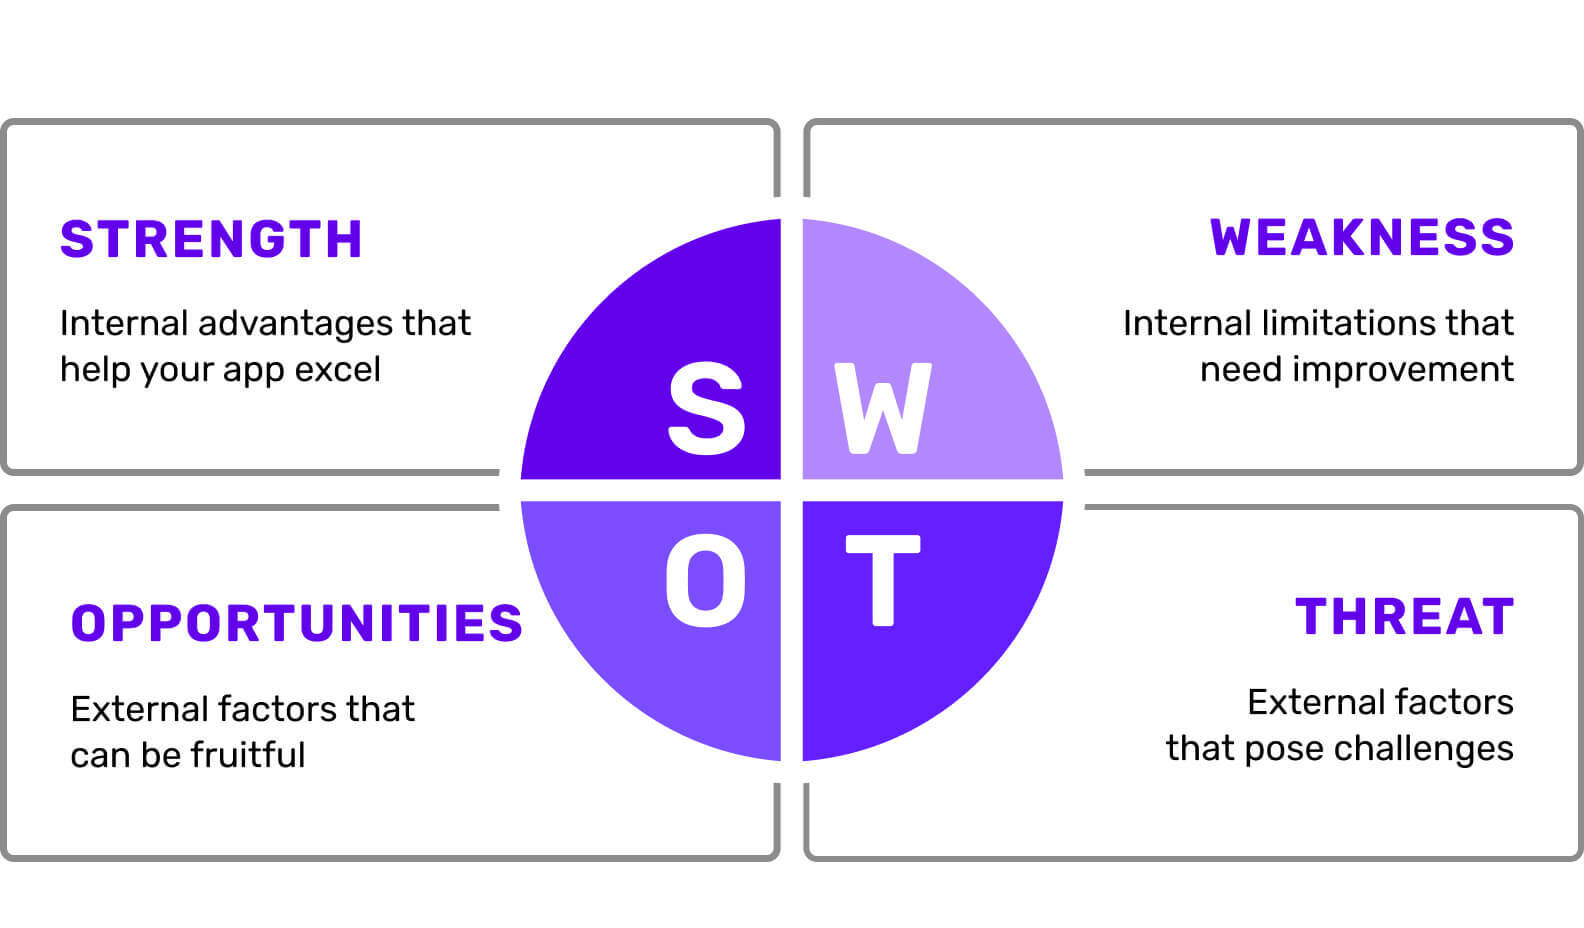 SWOT Matrix diagram for conducting an app SWOT analysis. The diagram consists the four components of SWOT analysis (Strengths, Weaknesses, Opportunities and Threats)